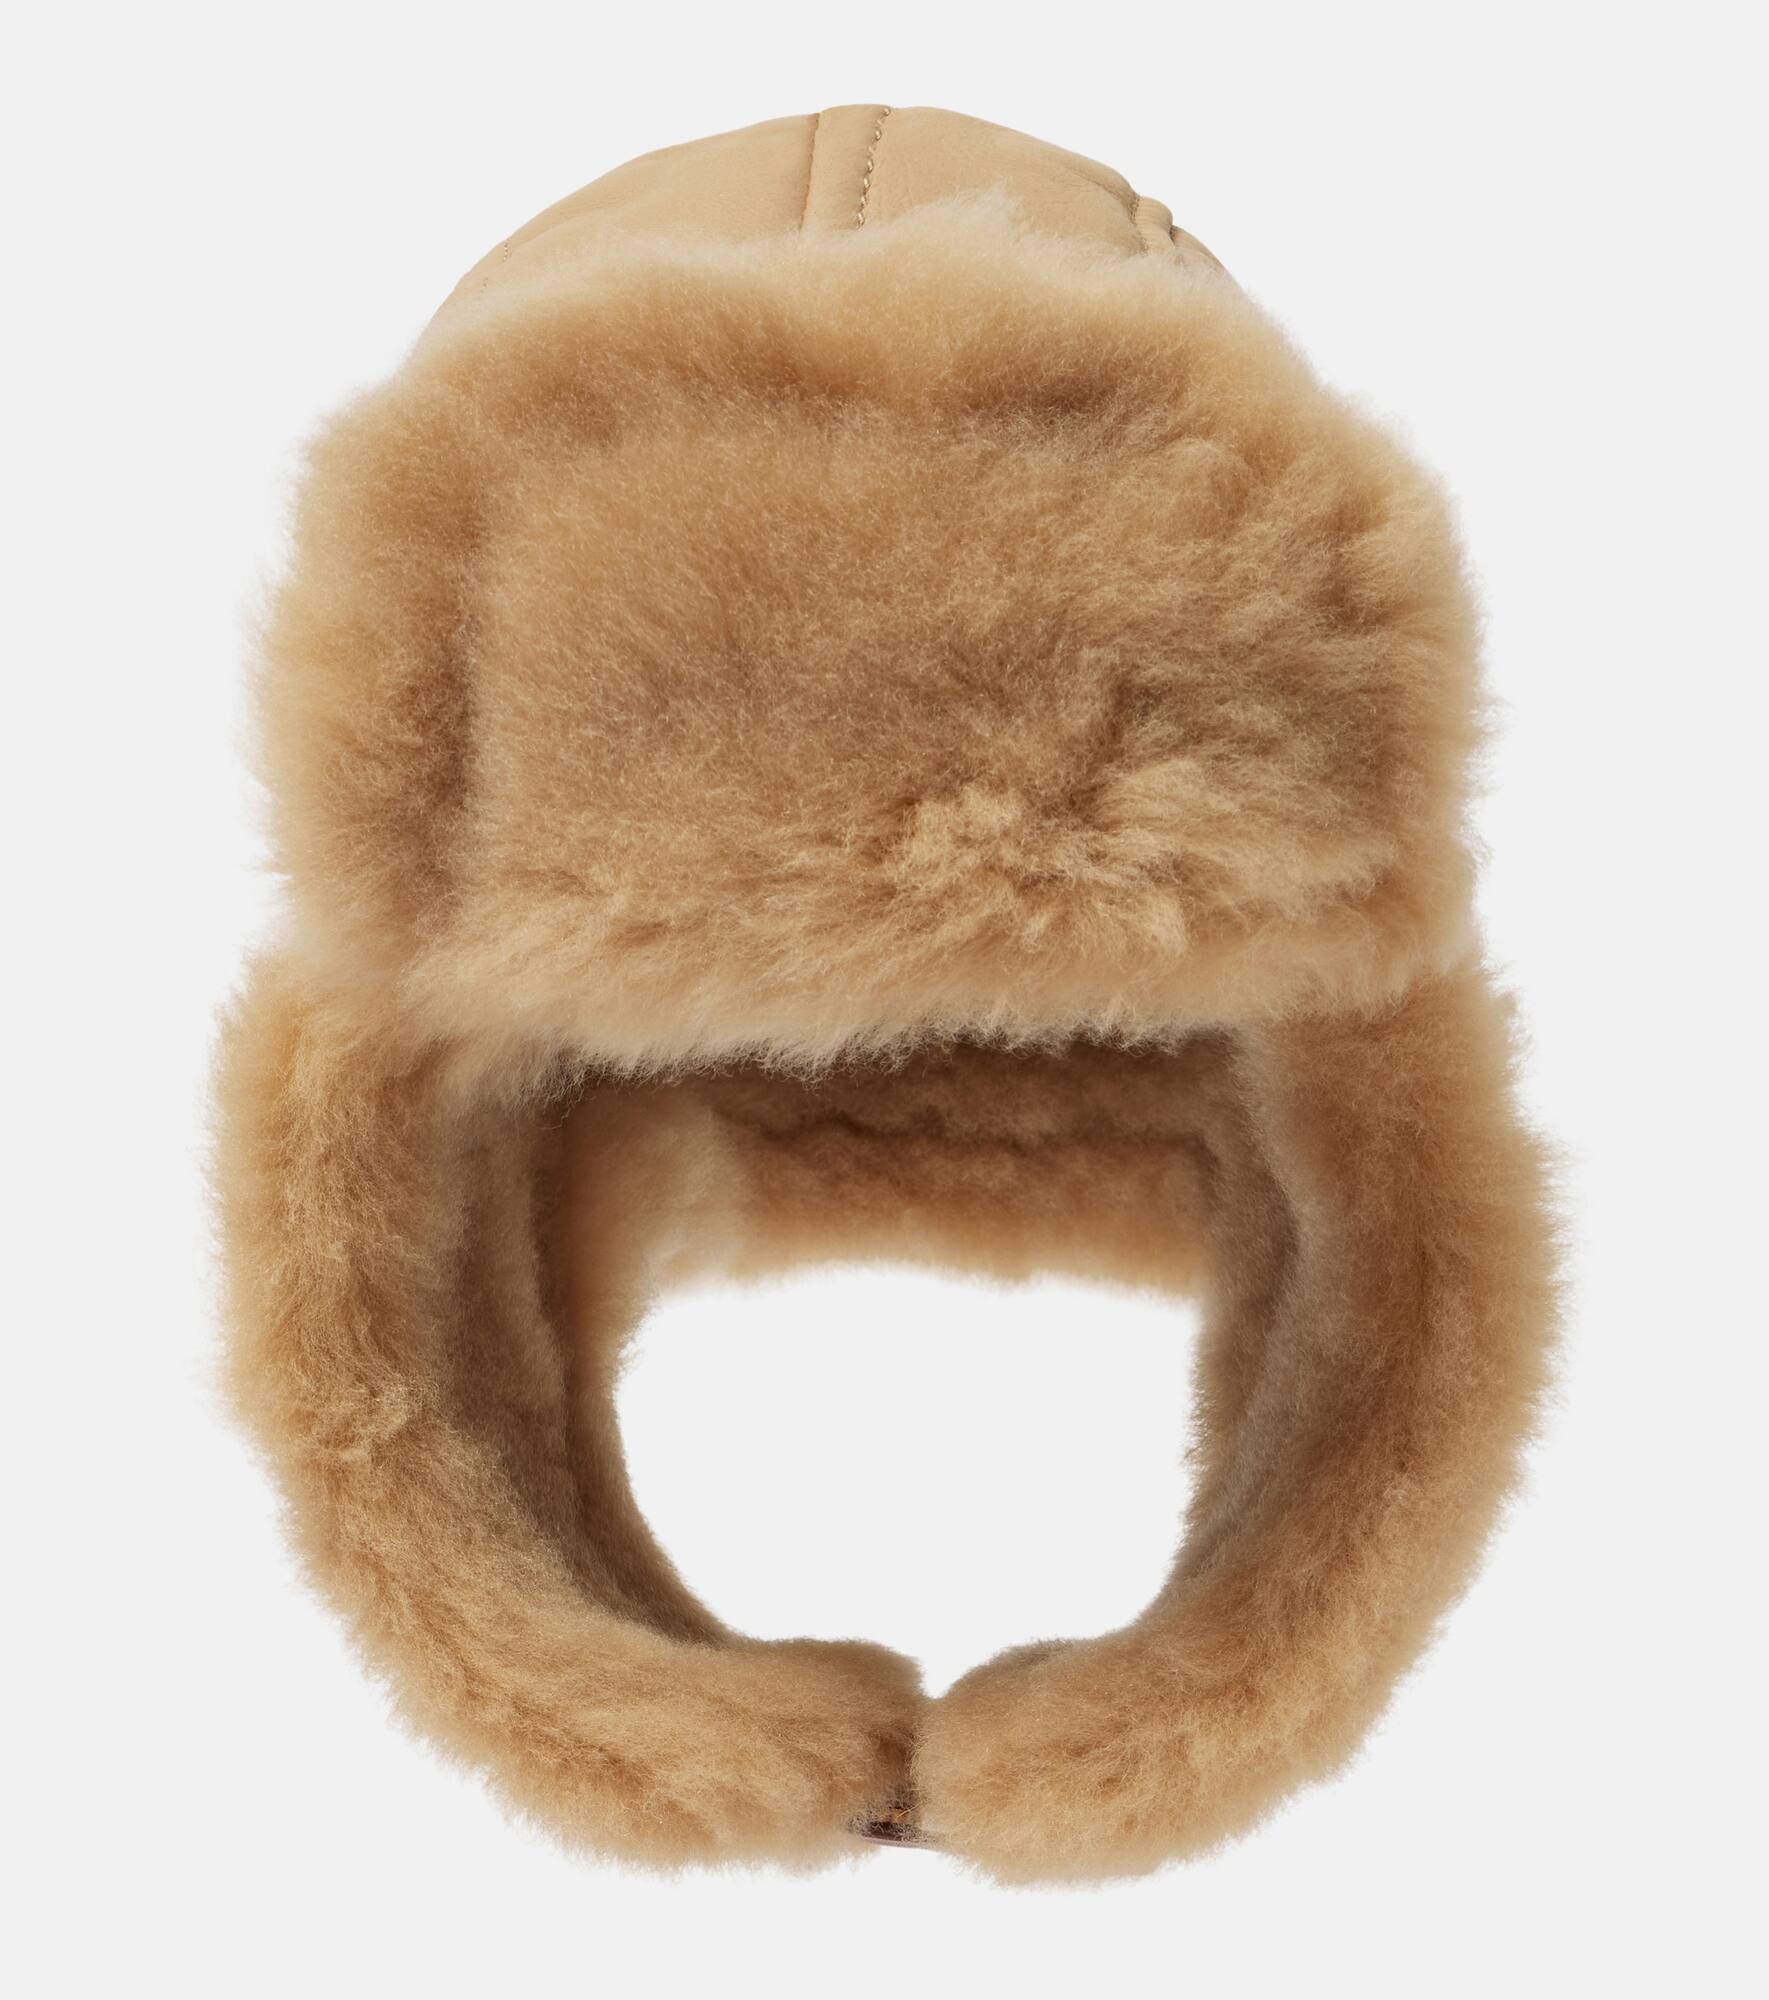 Alaskan shearling-lined leather hat - 1